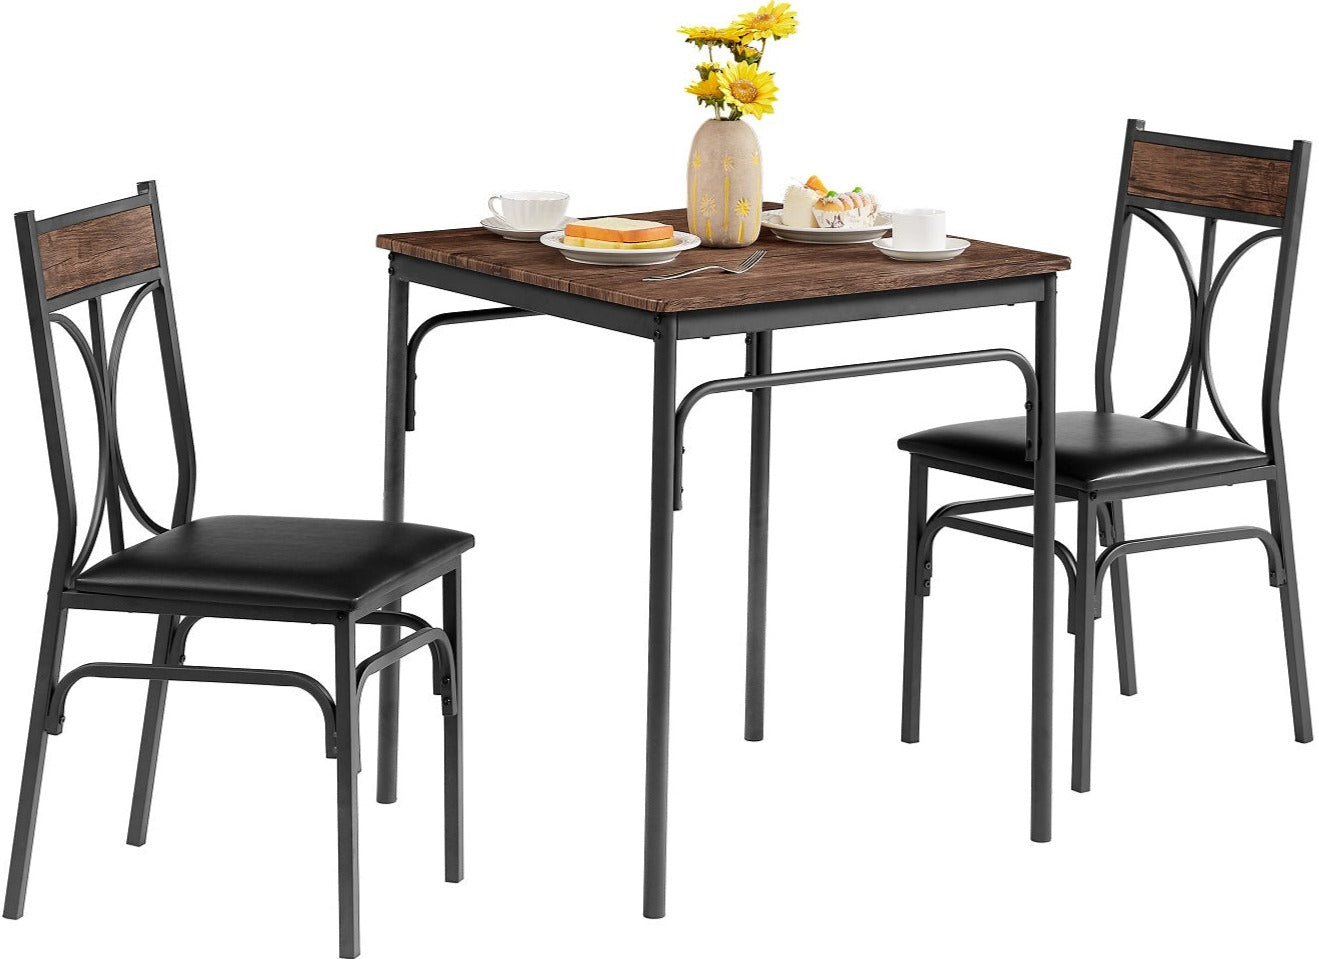 VECELO Industrial Style 3-Piece Dining Room Table Set with 2 PU Padded Chairs